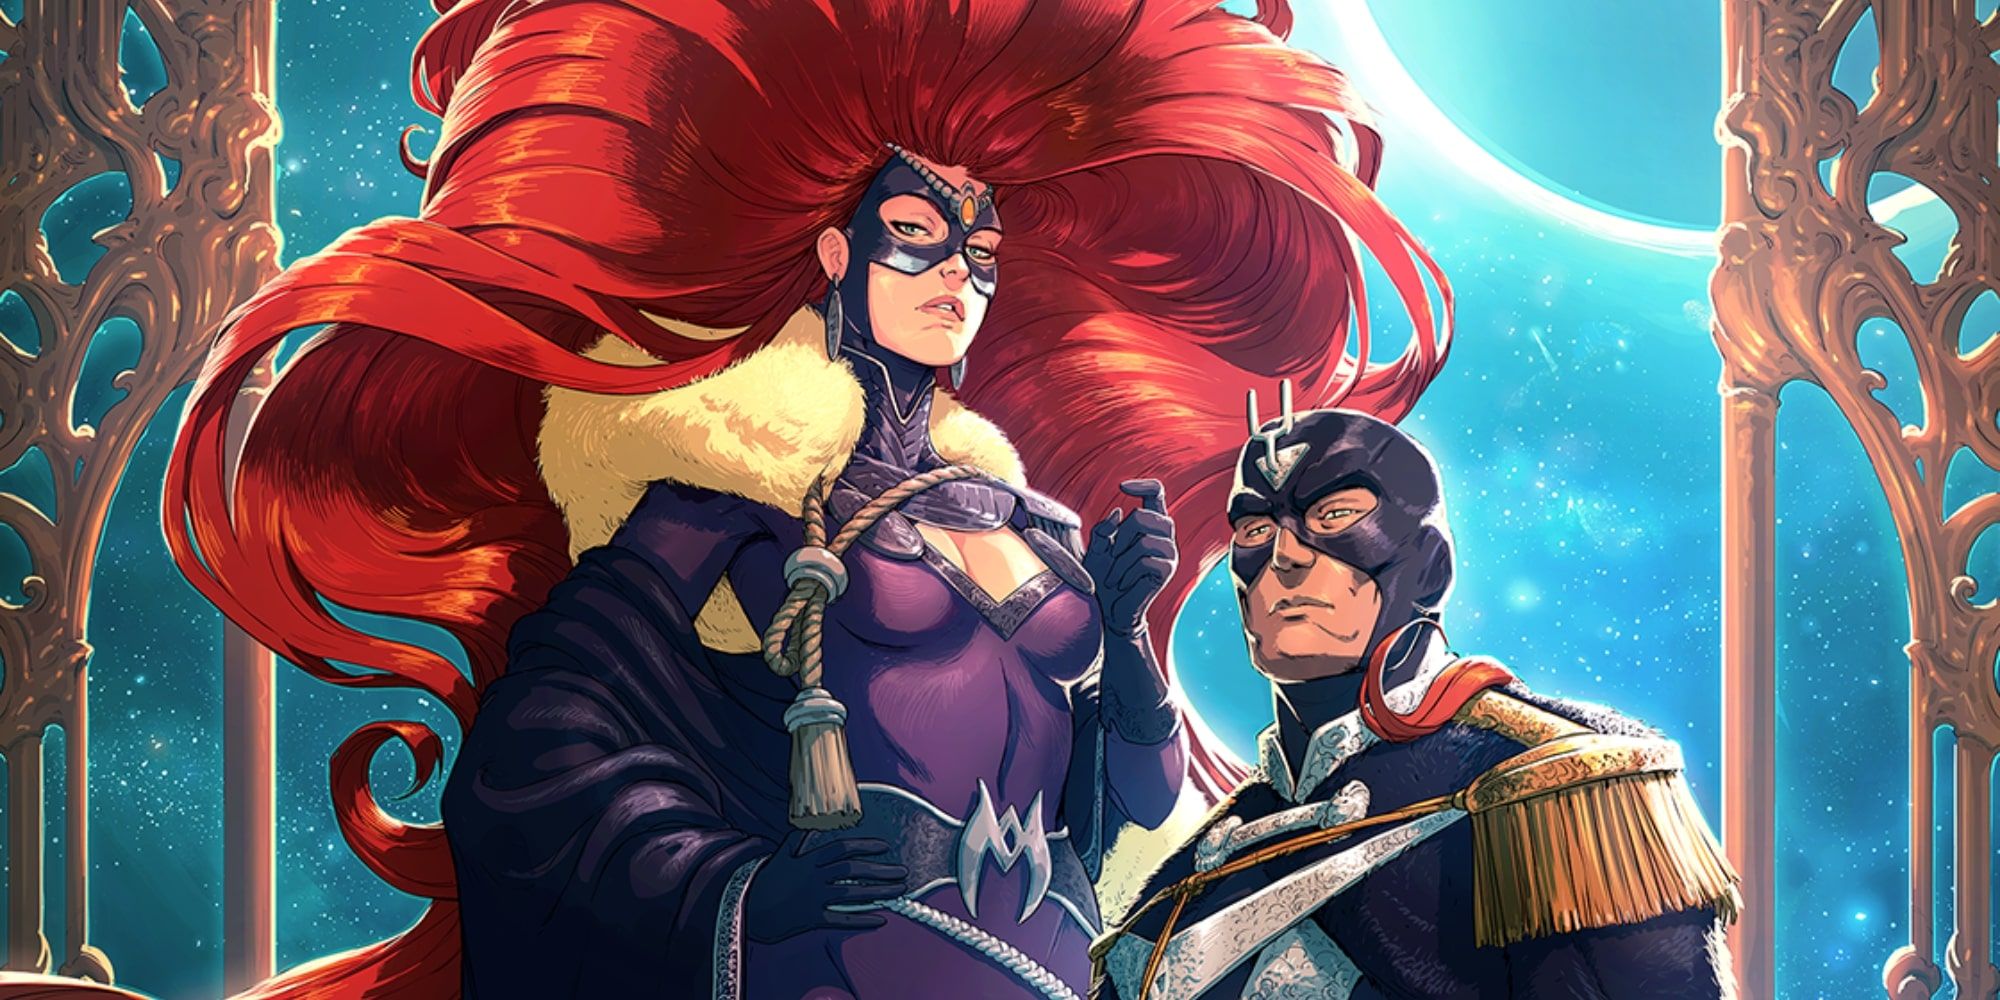 image-of-the-King-of-the-Inhumans-Black-Bolt-(Blackagar-Boltagon)-and-Queen-Medusa-with-red-hair-1